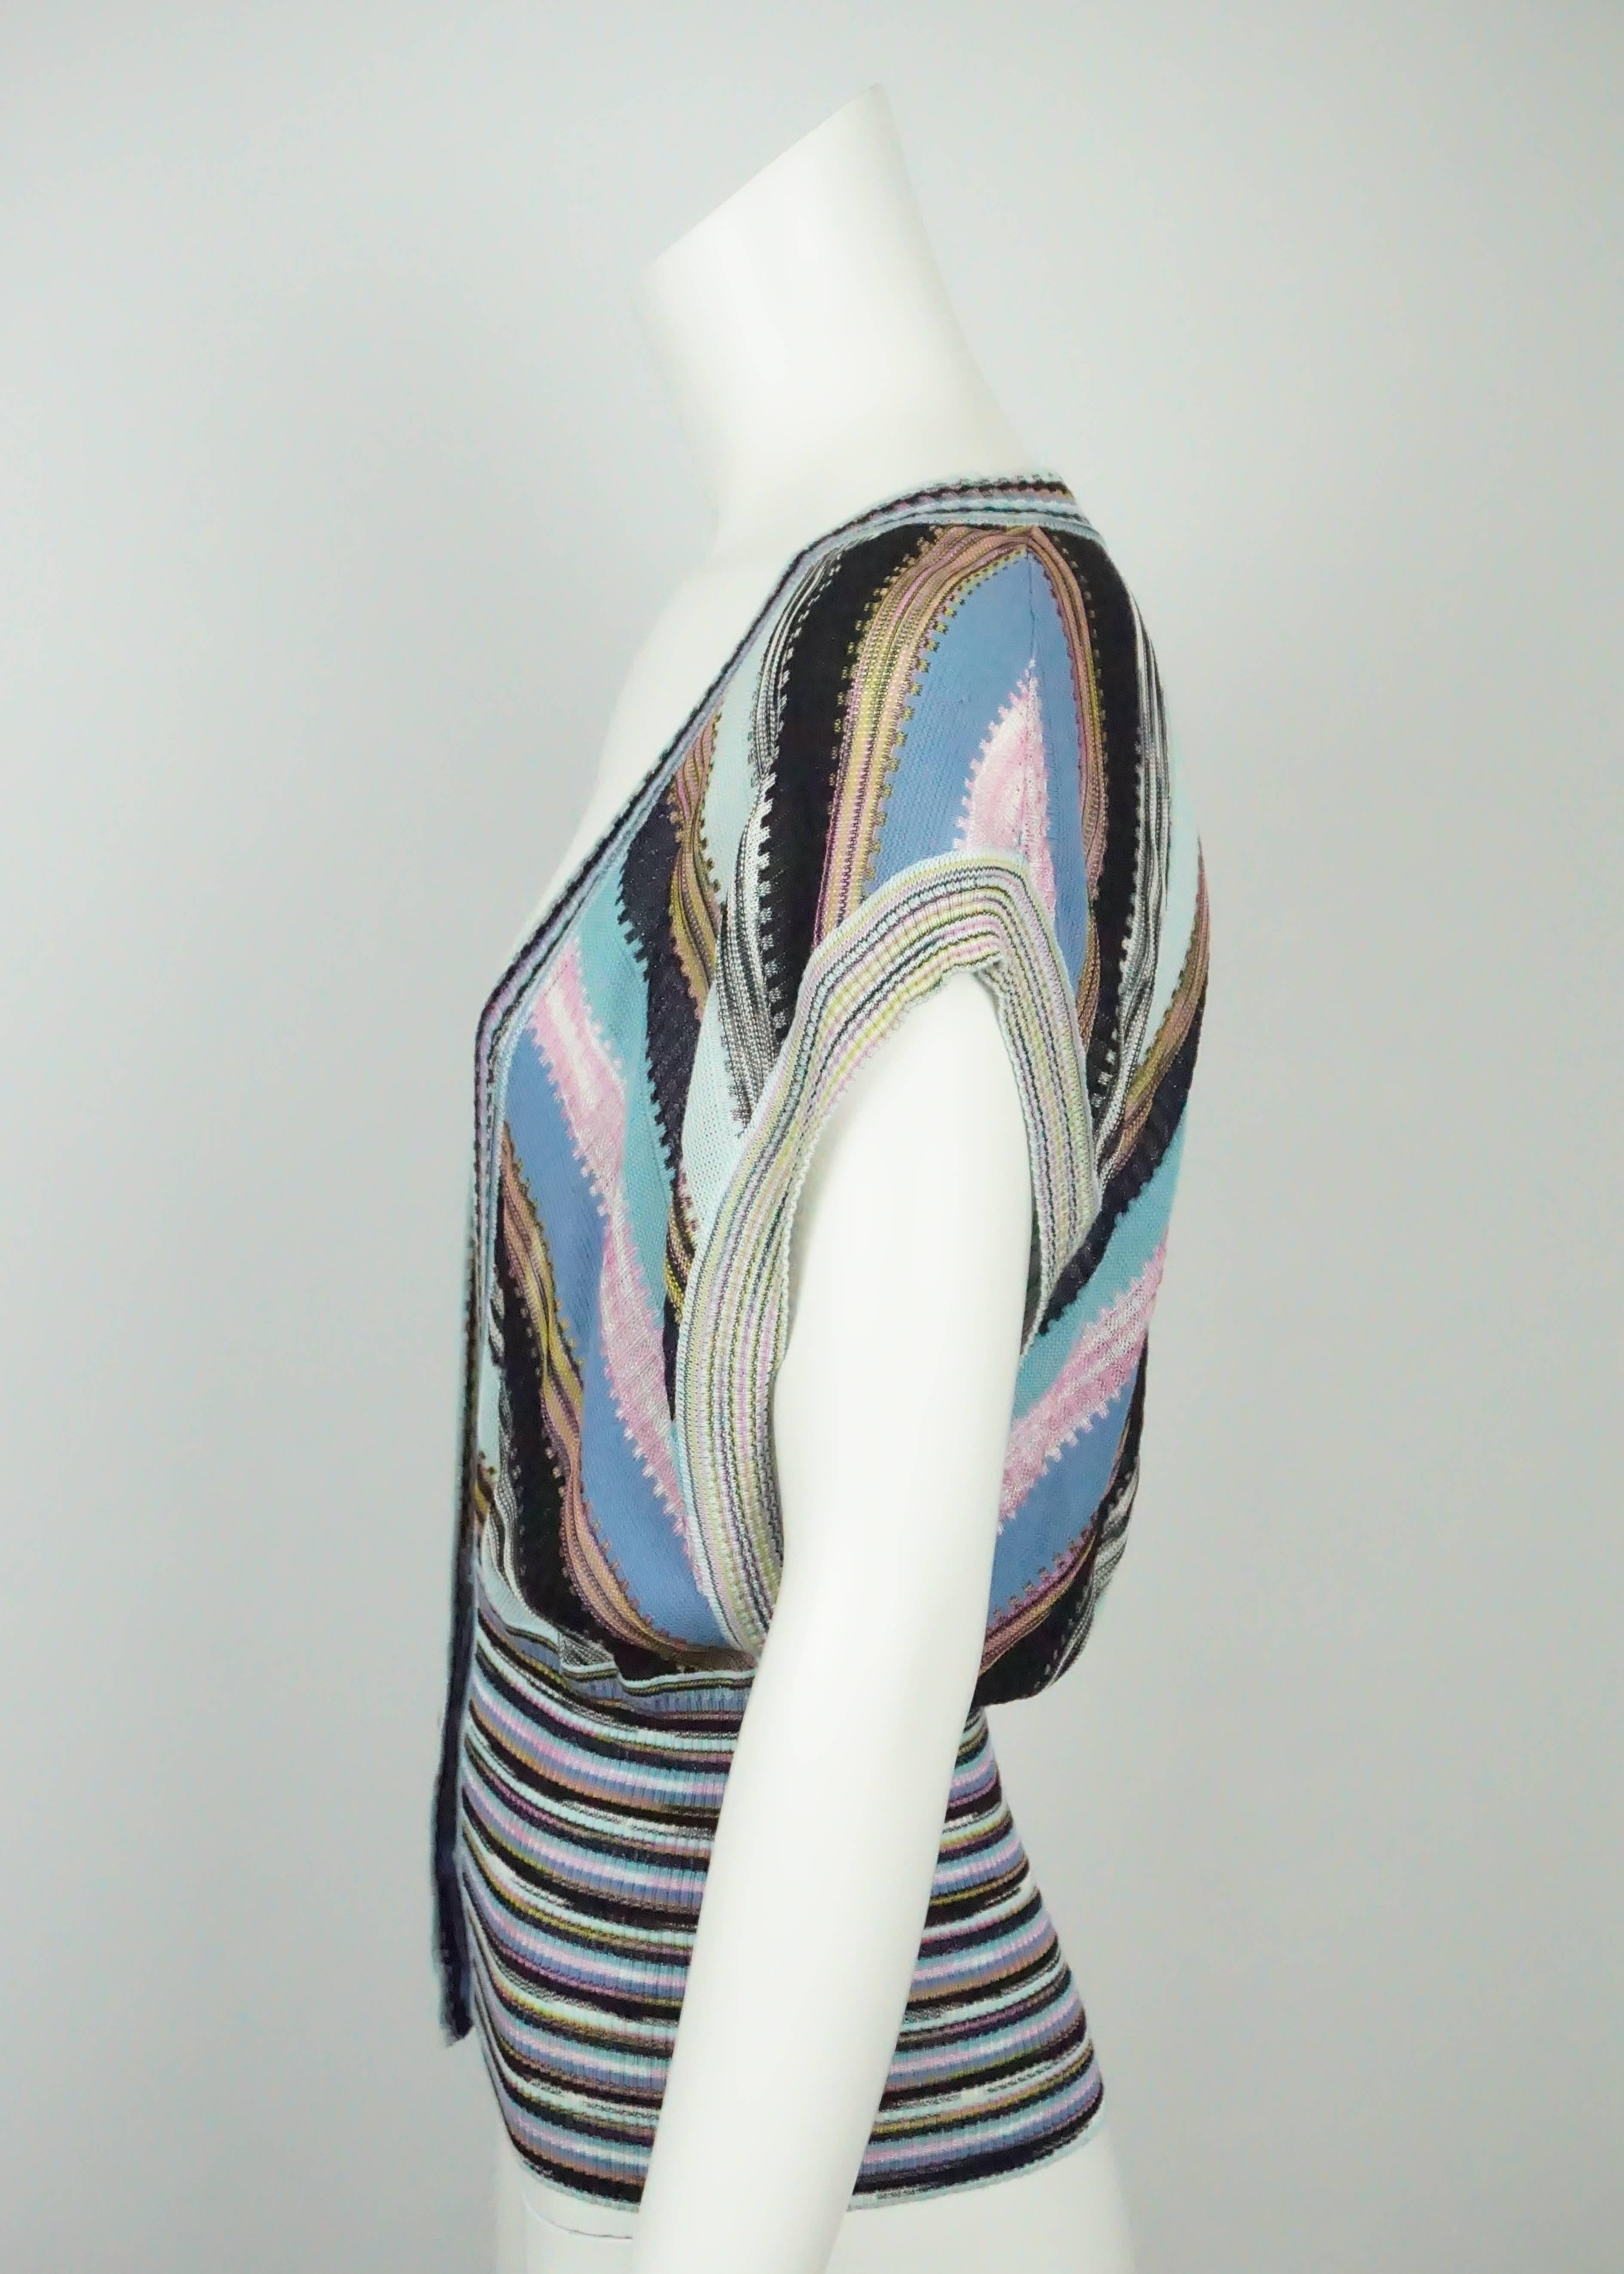 M Missoni Multi Knit V Neck Sleeveless Top - 42 This colorful Missoni top is in excellent condition. The top has stripes of navy blue metallic, pink , Blue, Mint, yellow, and black/white. There is a slight cap sleeve and the sides of the top are